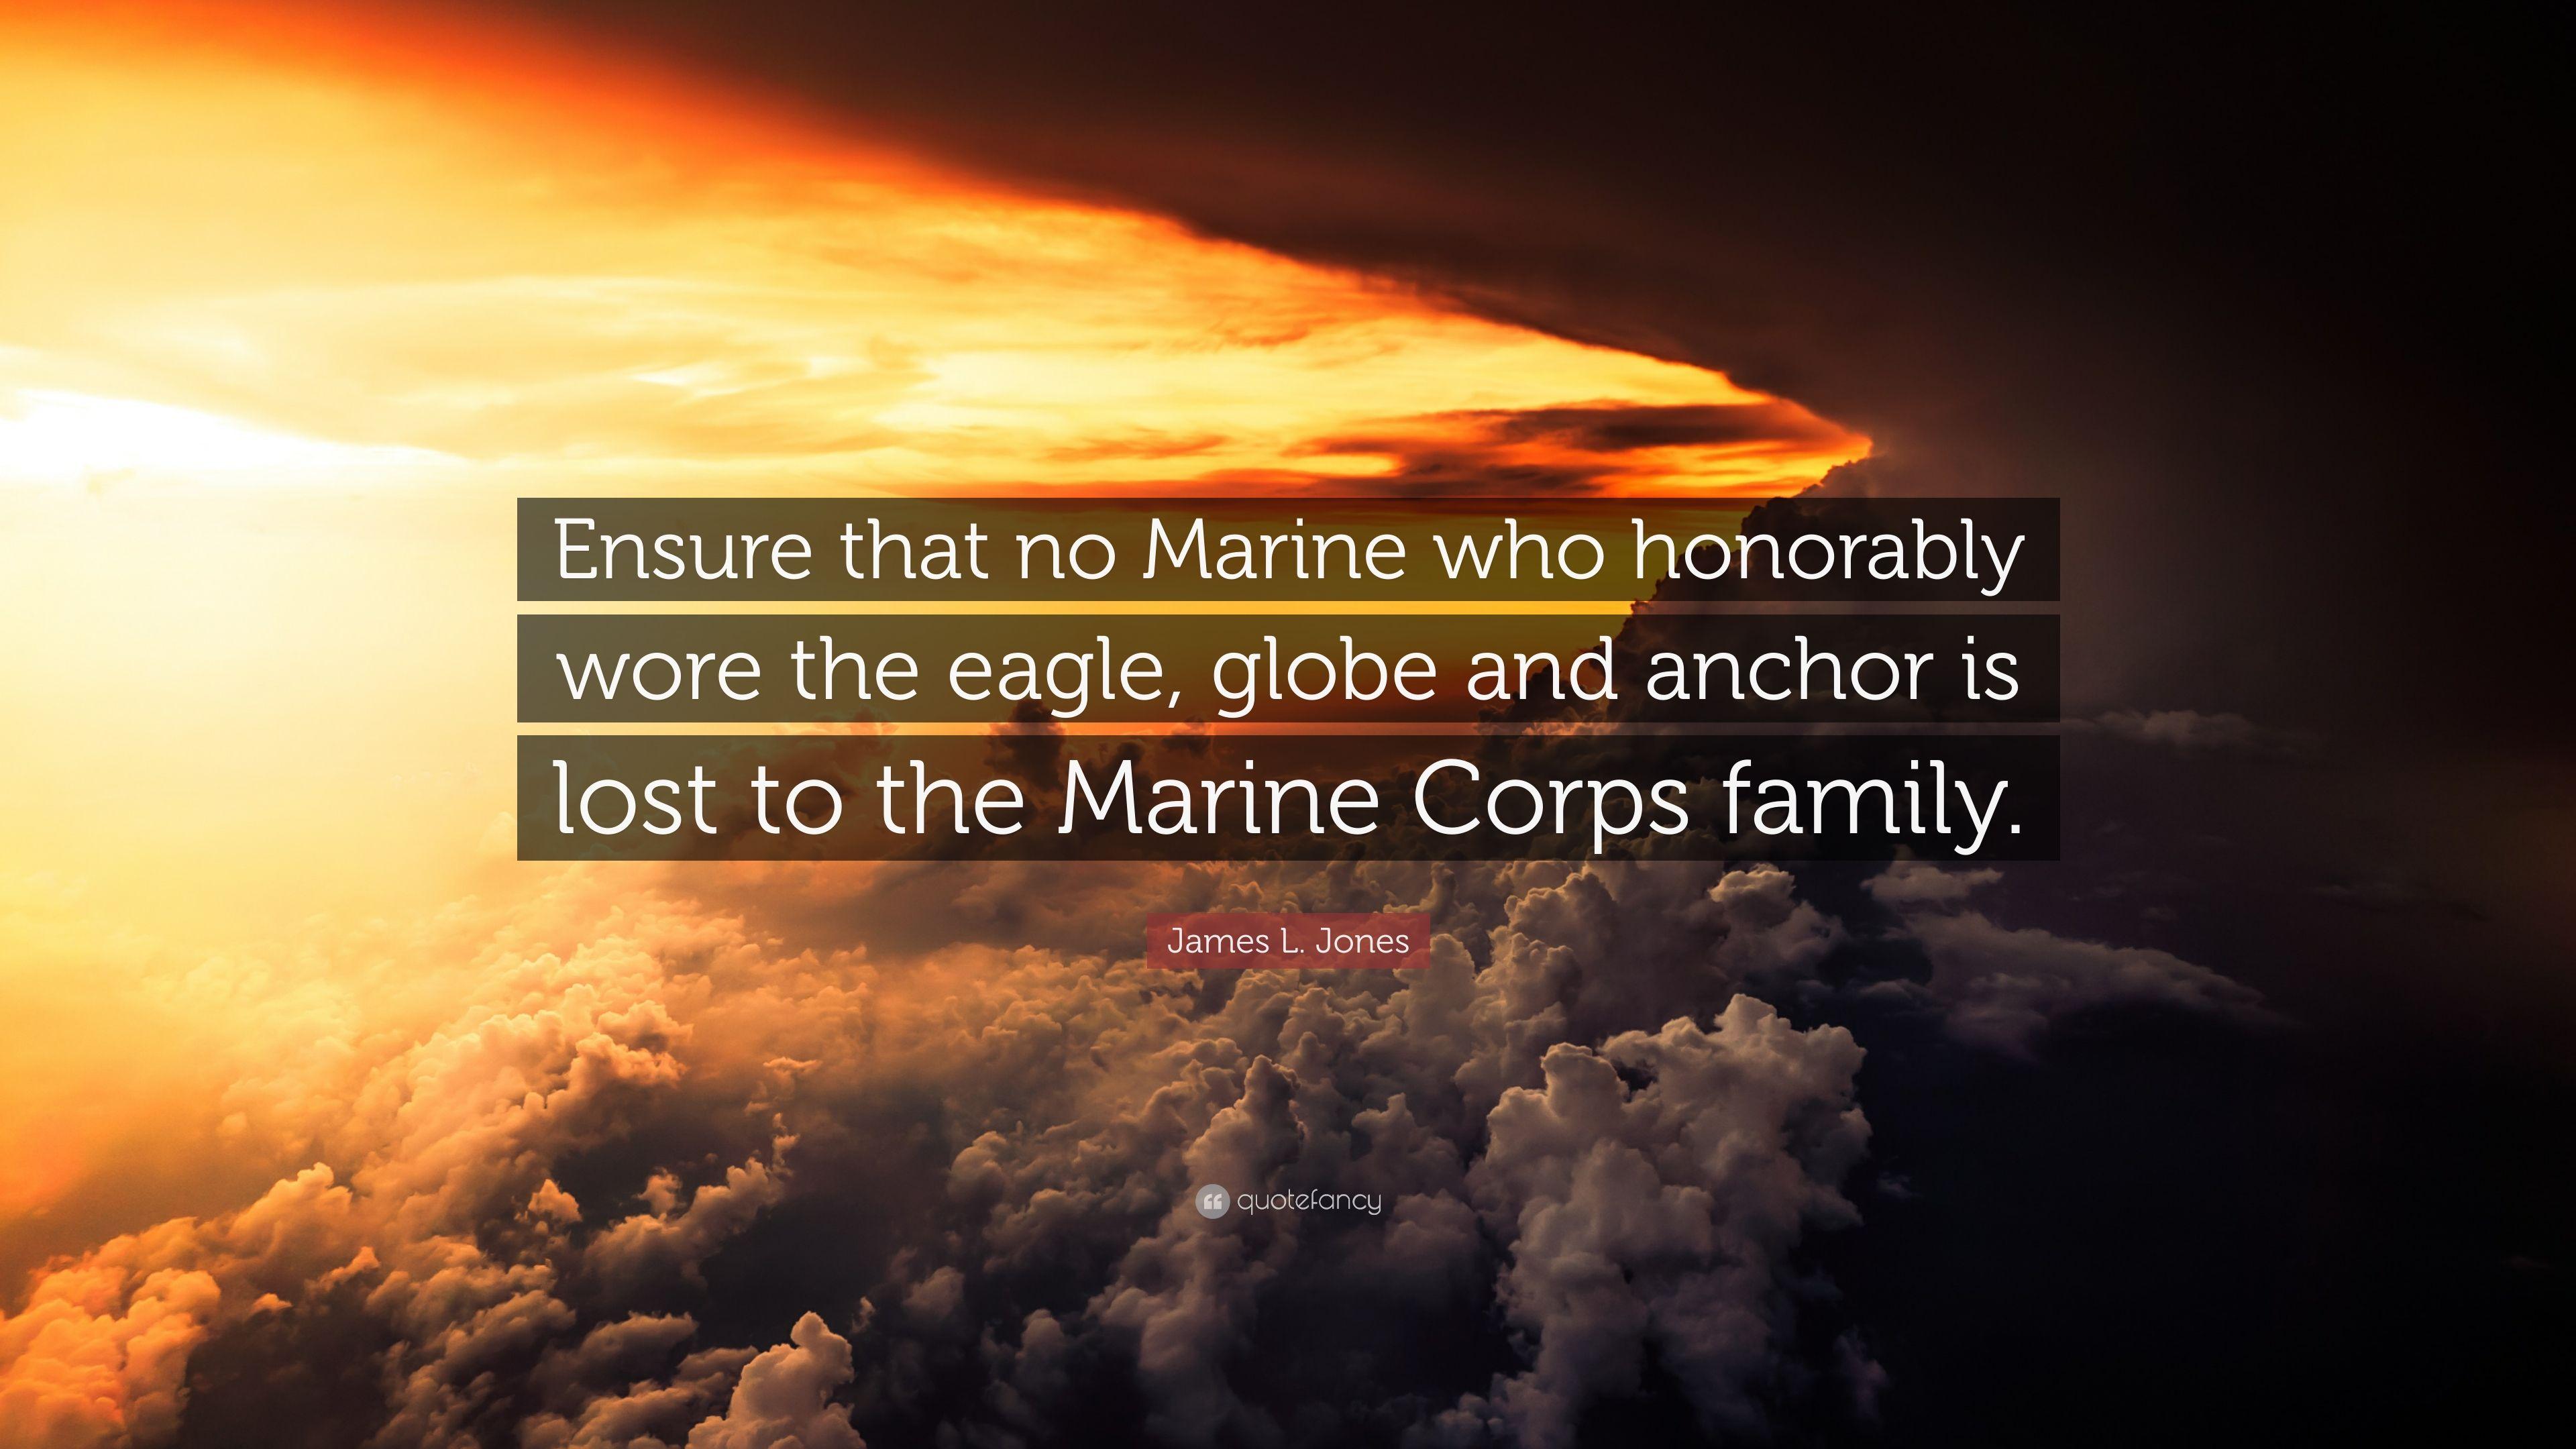 James L. Jones Quote: “Ensure that no Marine who honorably